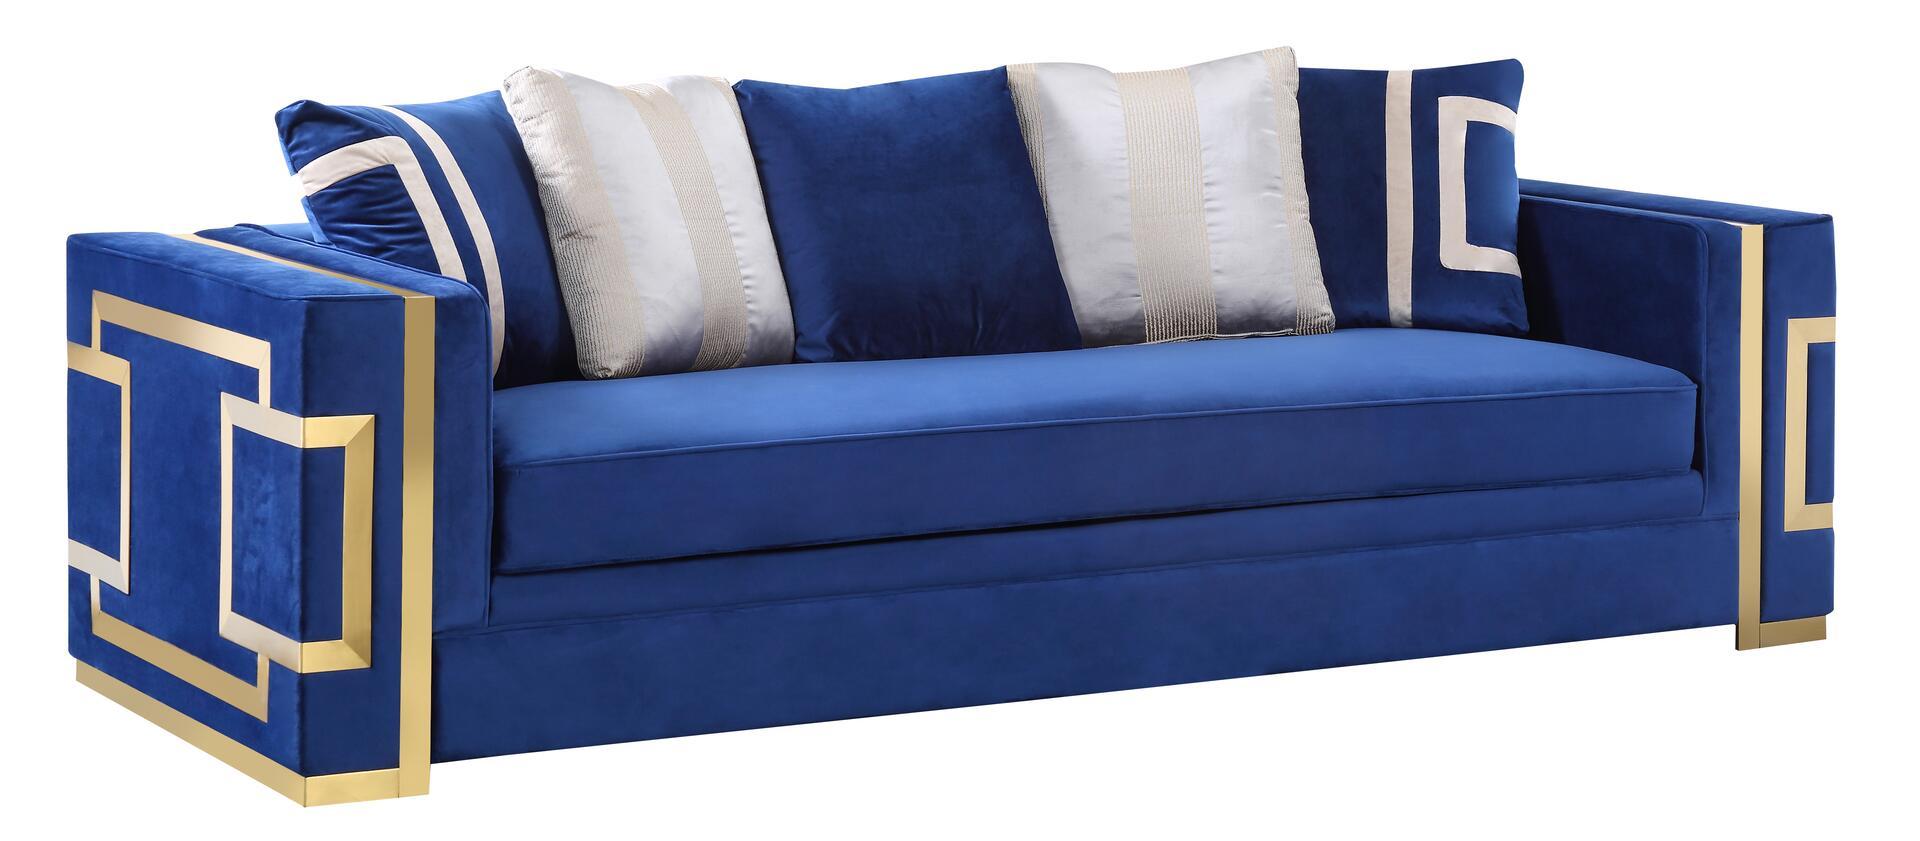 Transitional Sofa Lawrence Lawrence-Sofa in Gold, Blue Fabric